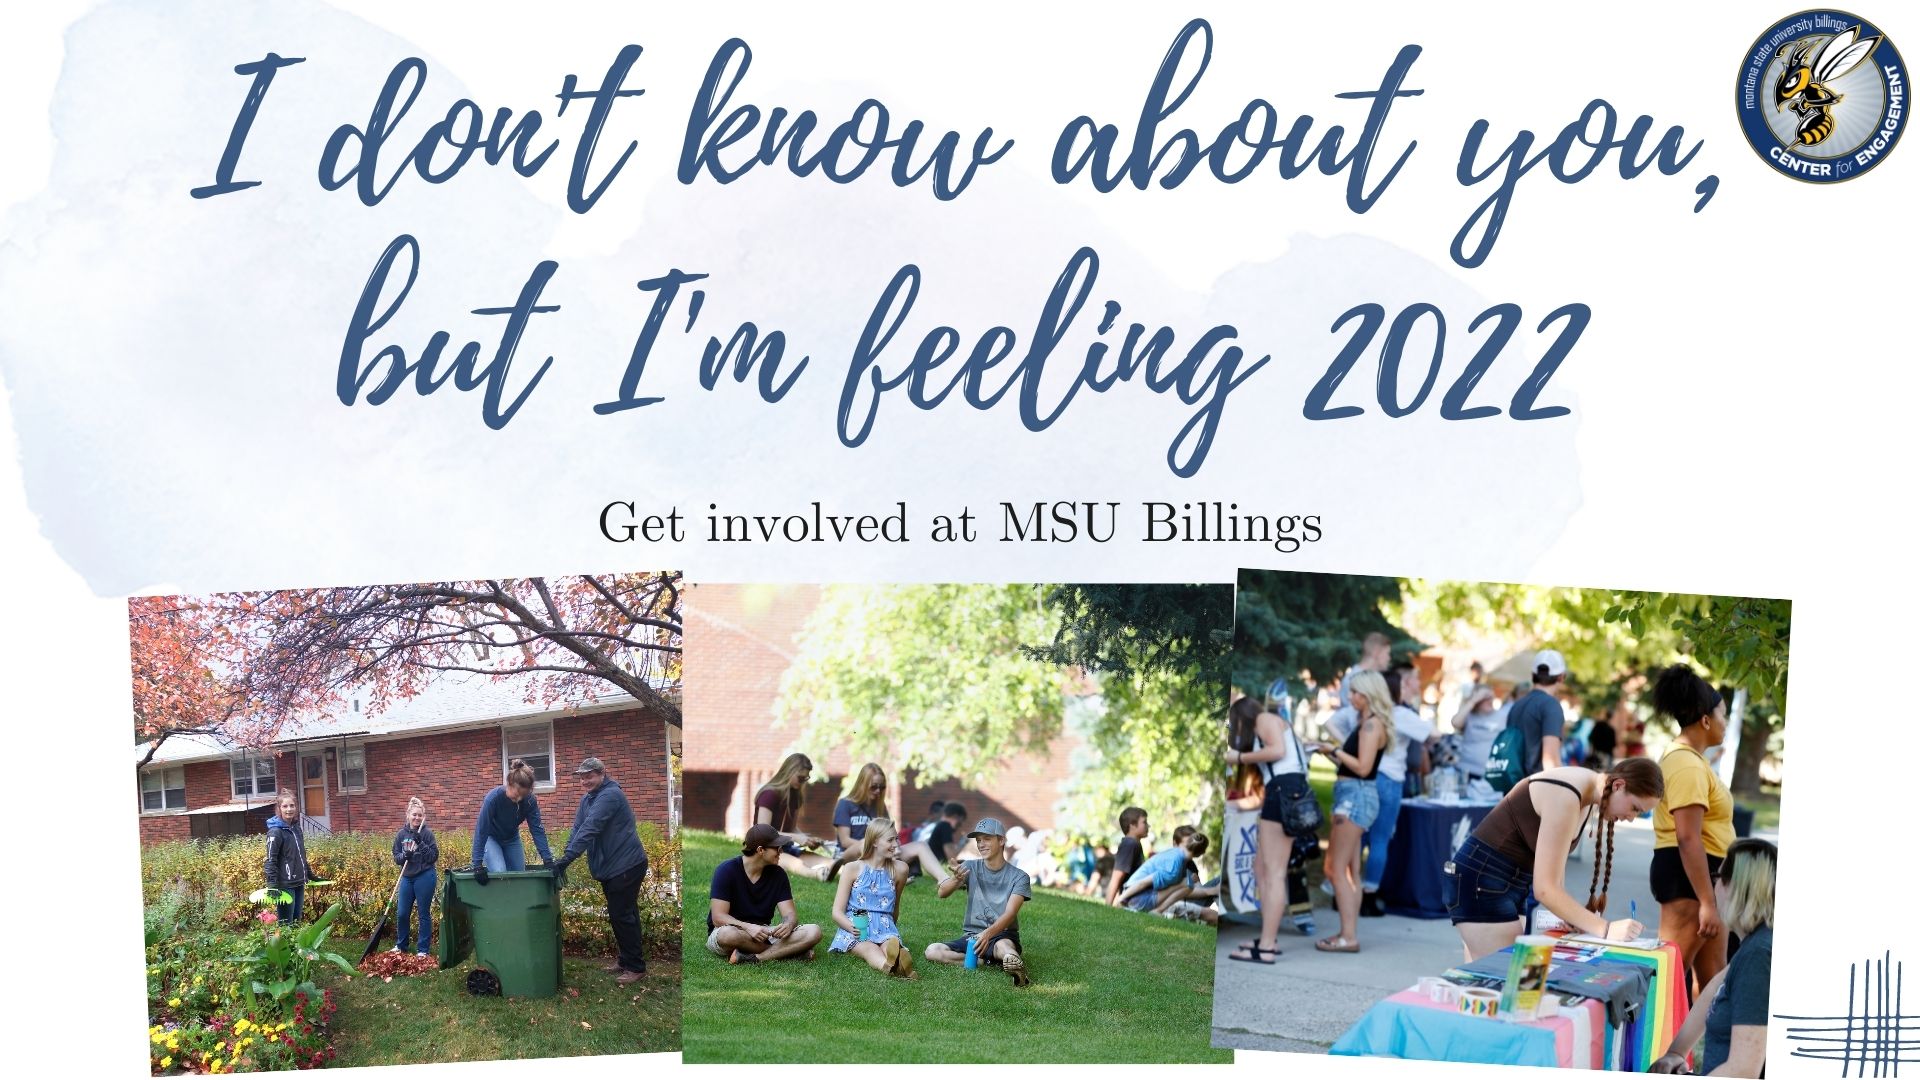 I don't know about you, but I'm feeling 2022. Get involved at MSU Billings.